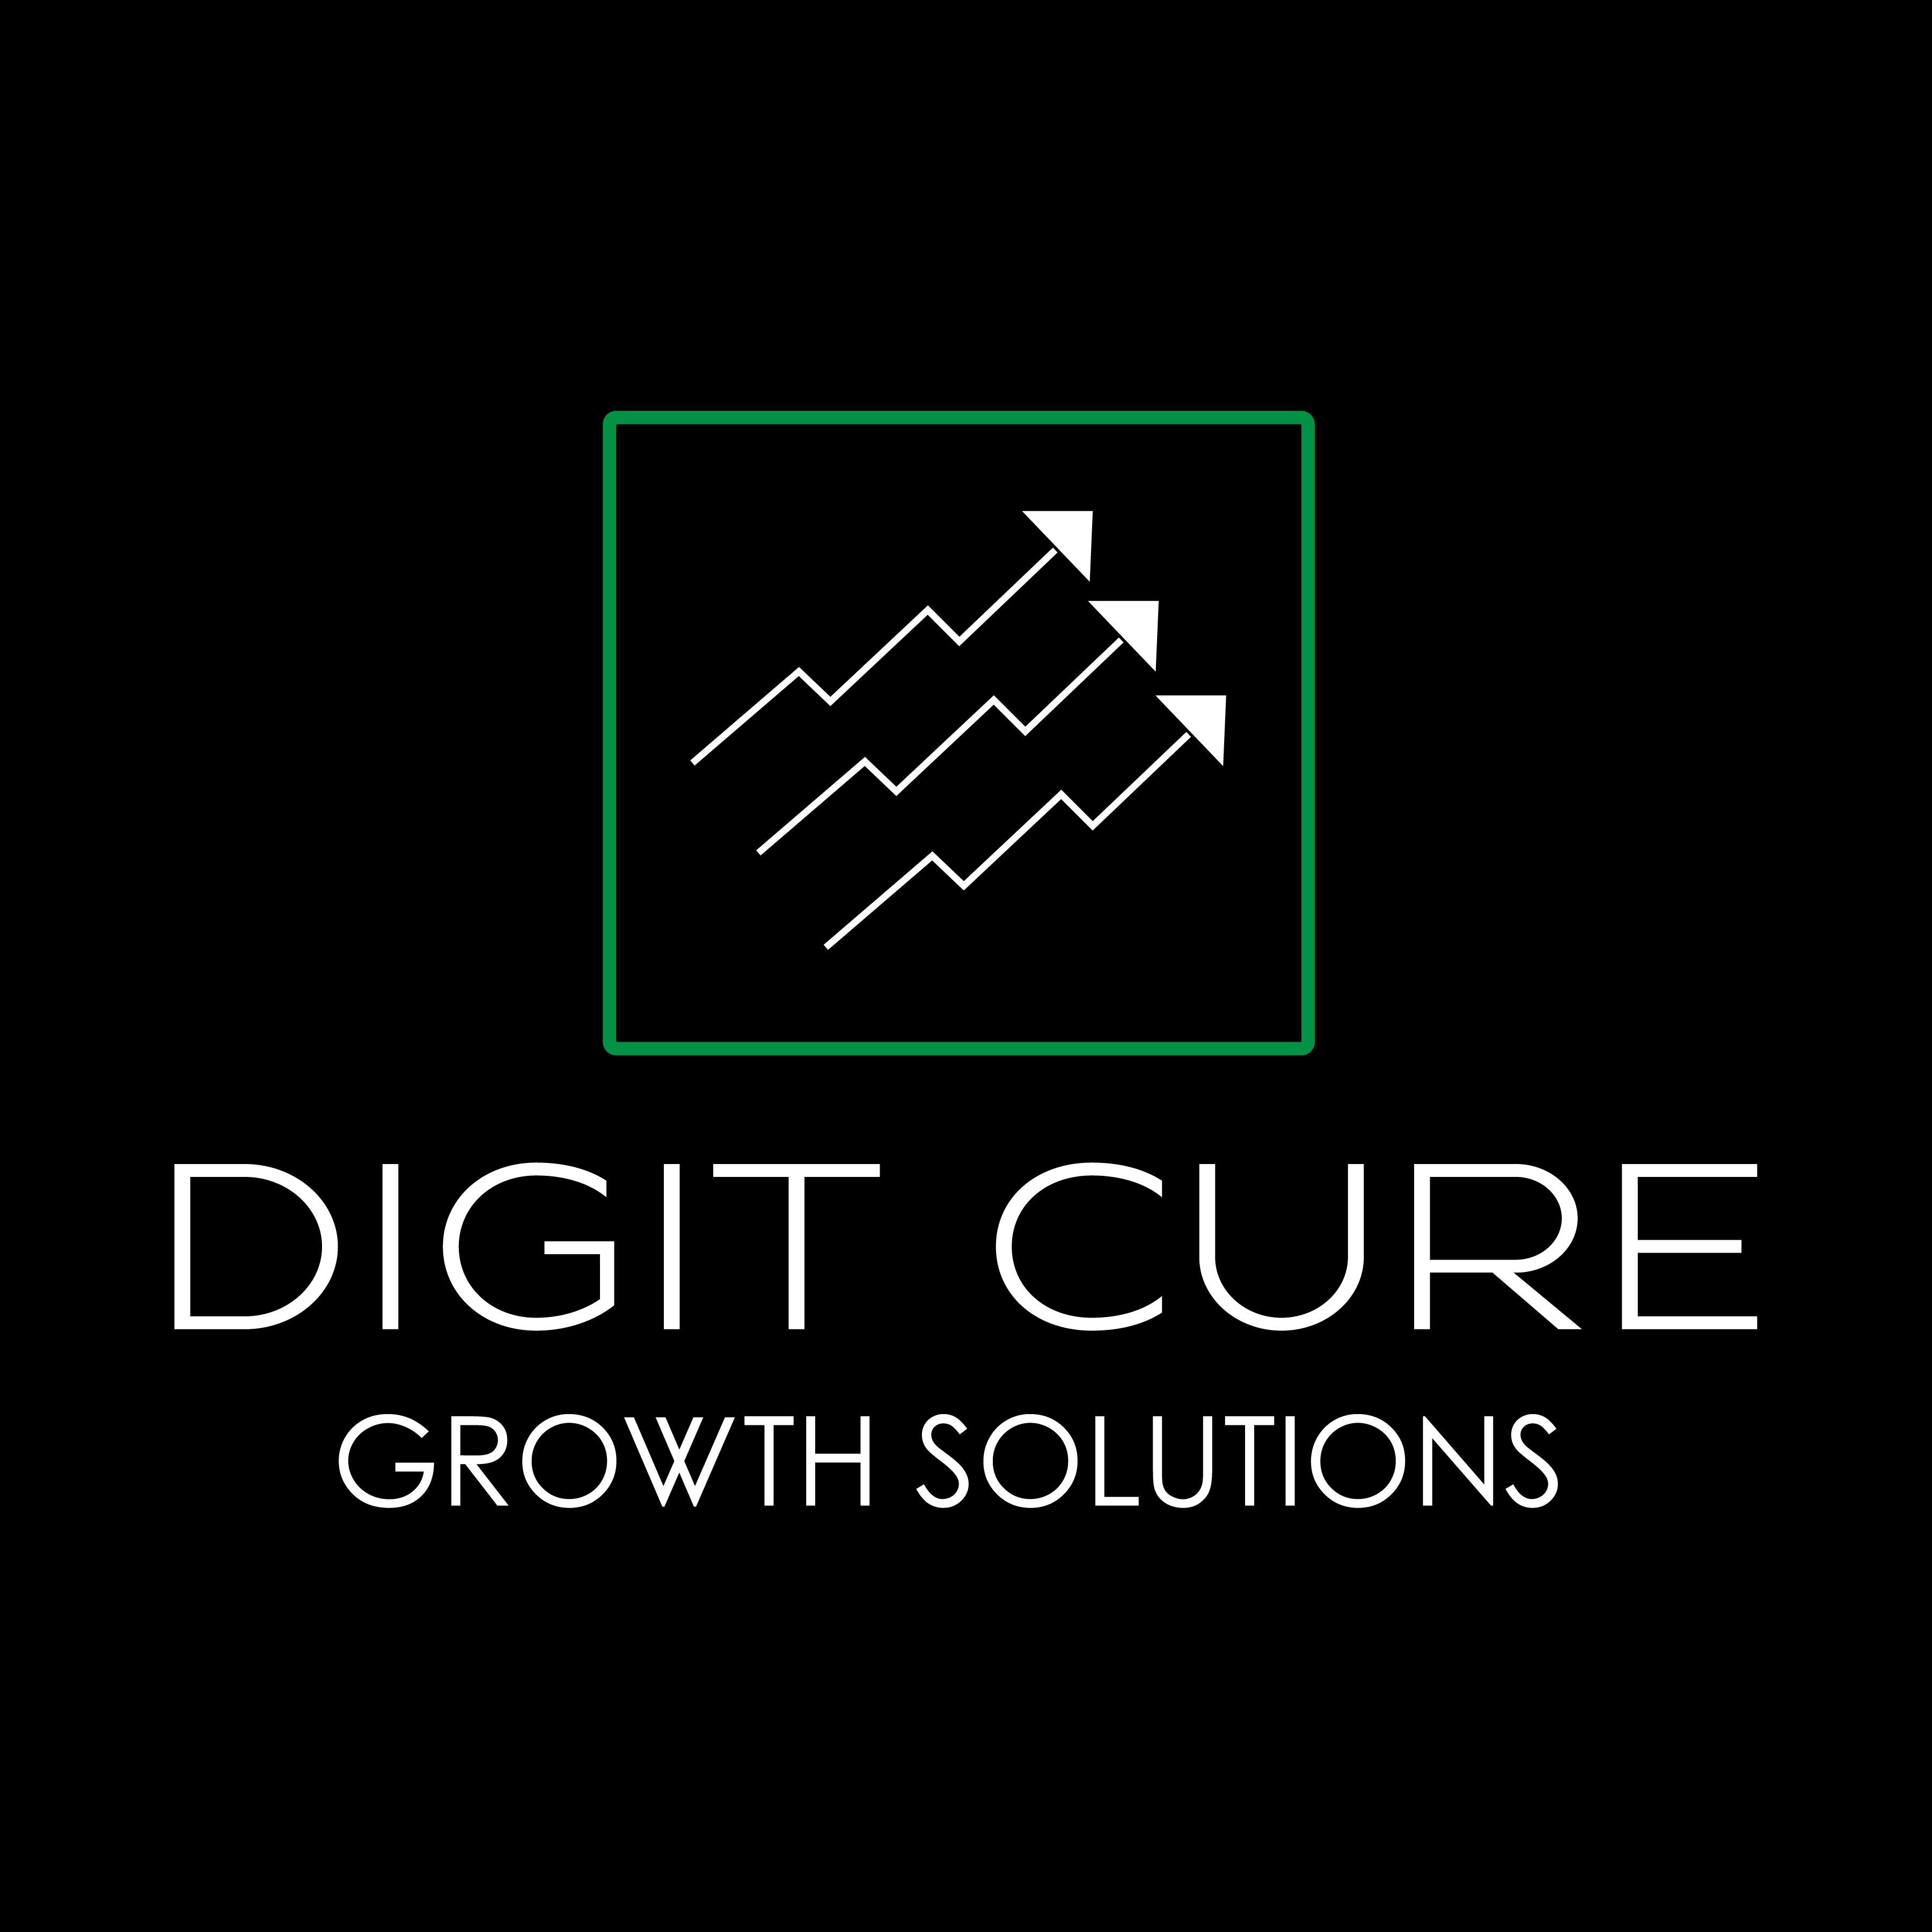 Digit Cure - Growth Solutions profile on Qualified.One